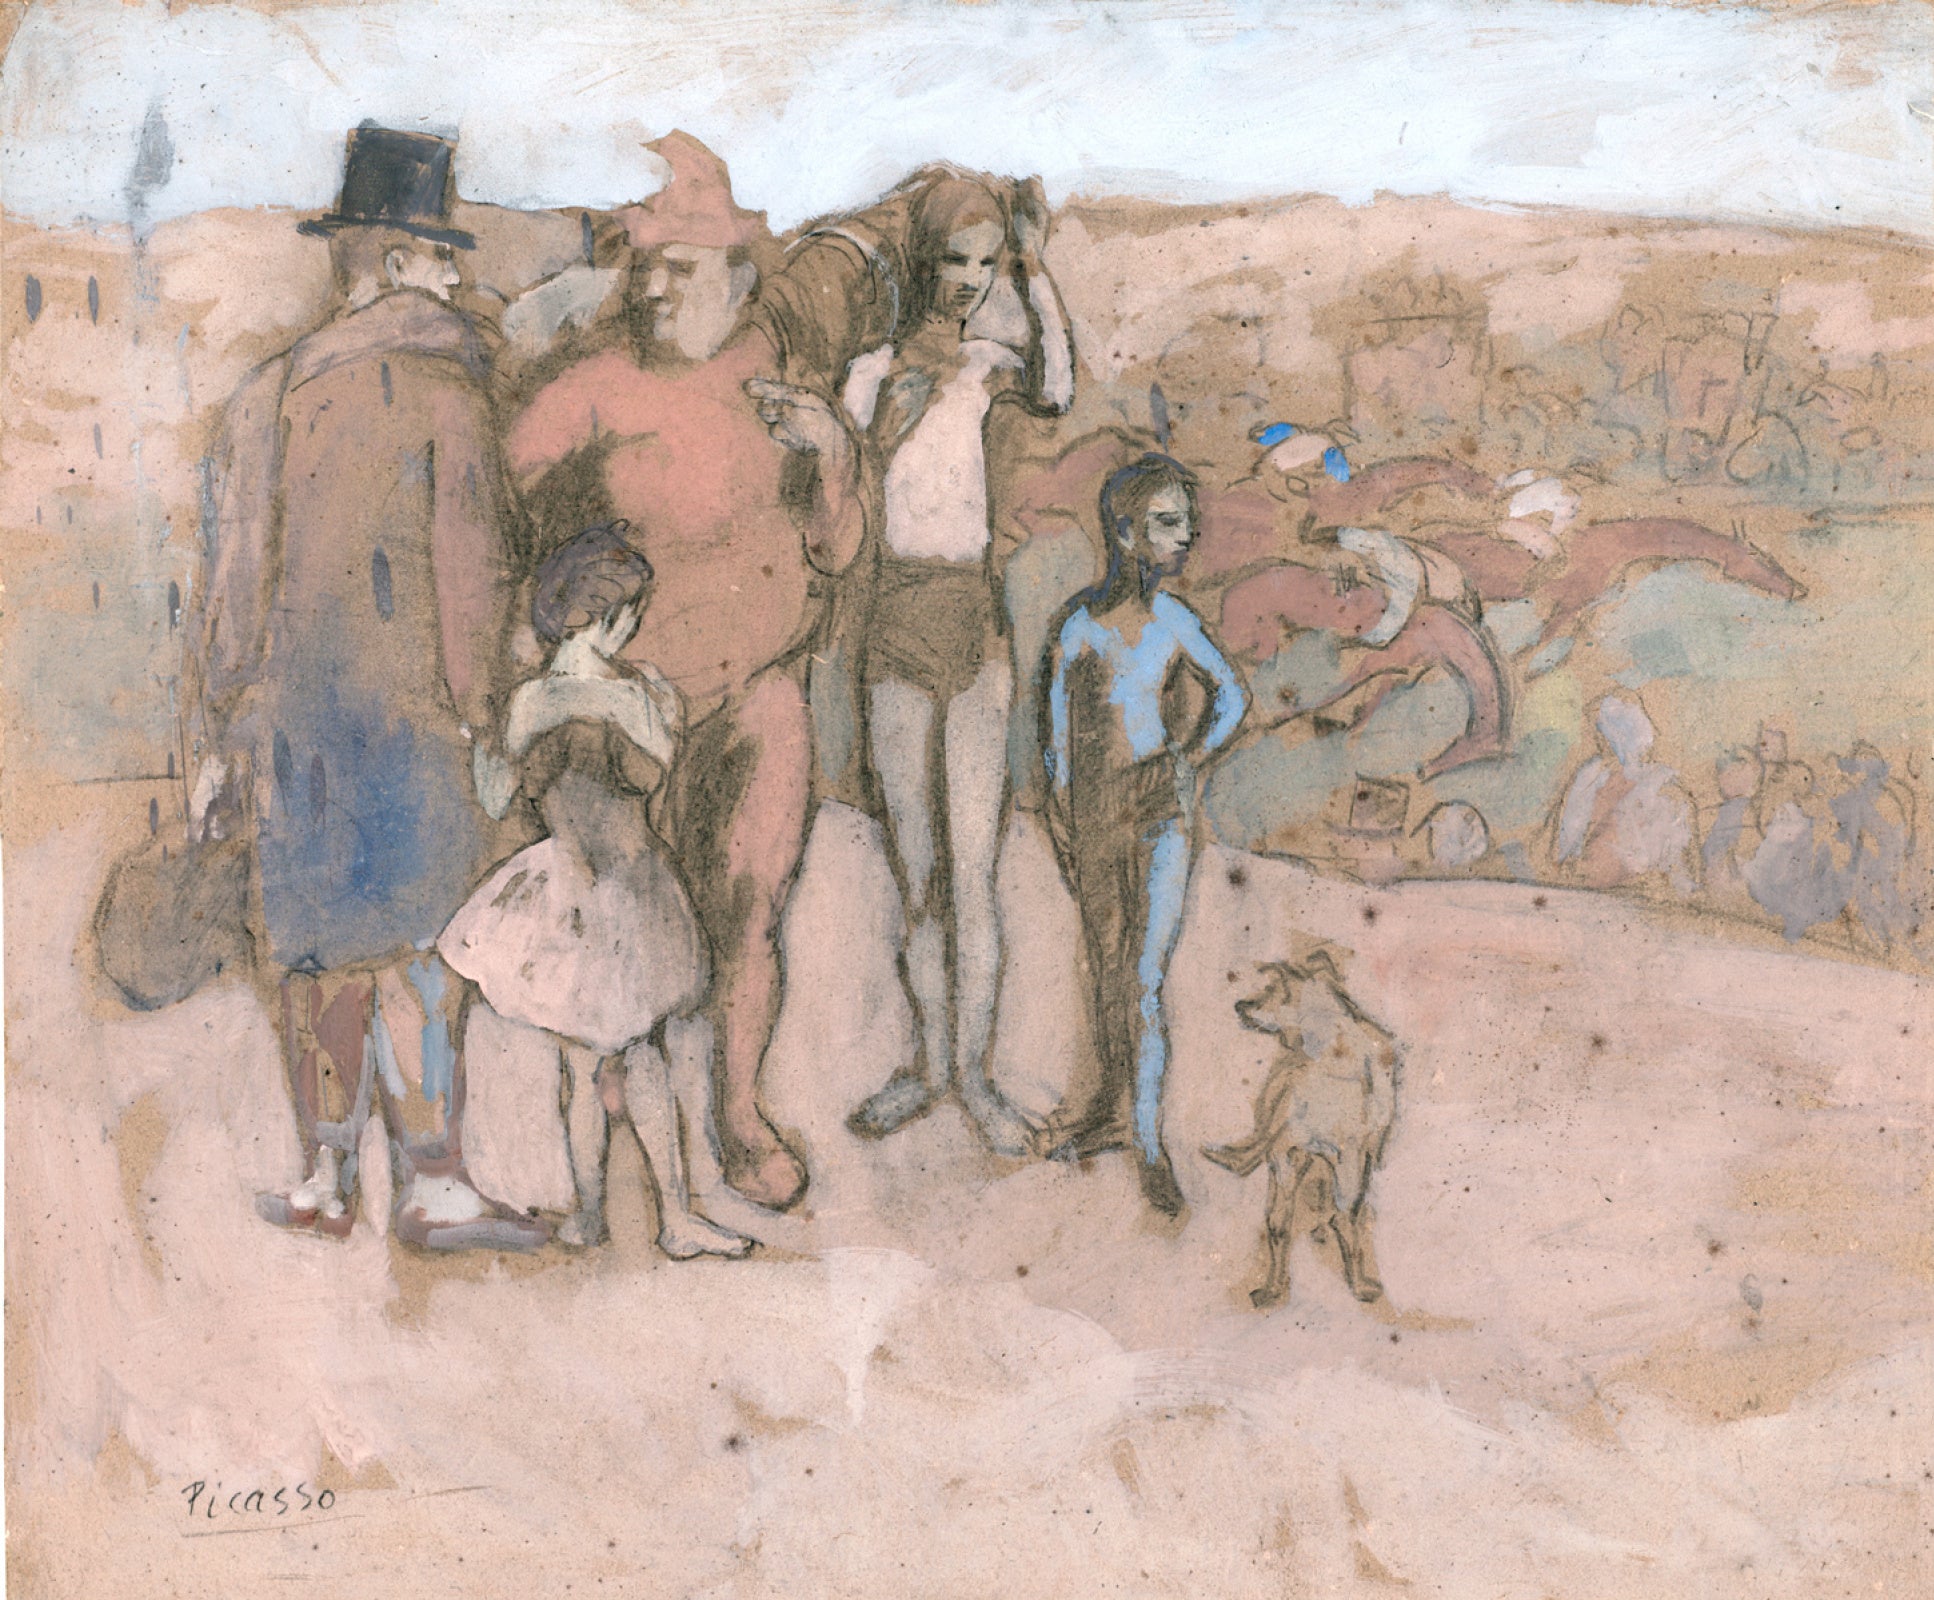 Family of acrobats. Study (1905) Signed Picasso - 17" x 22" Fine Art Print